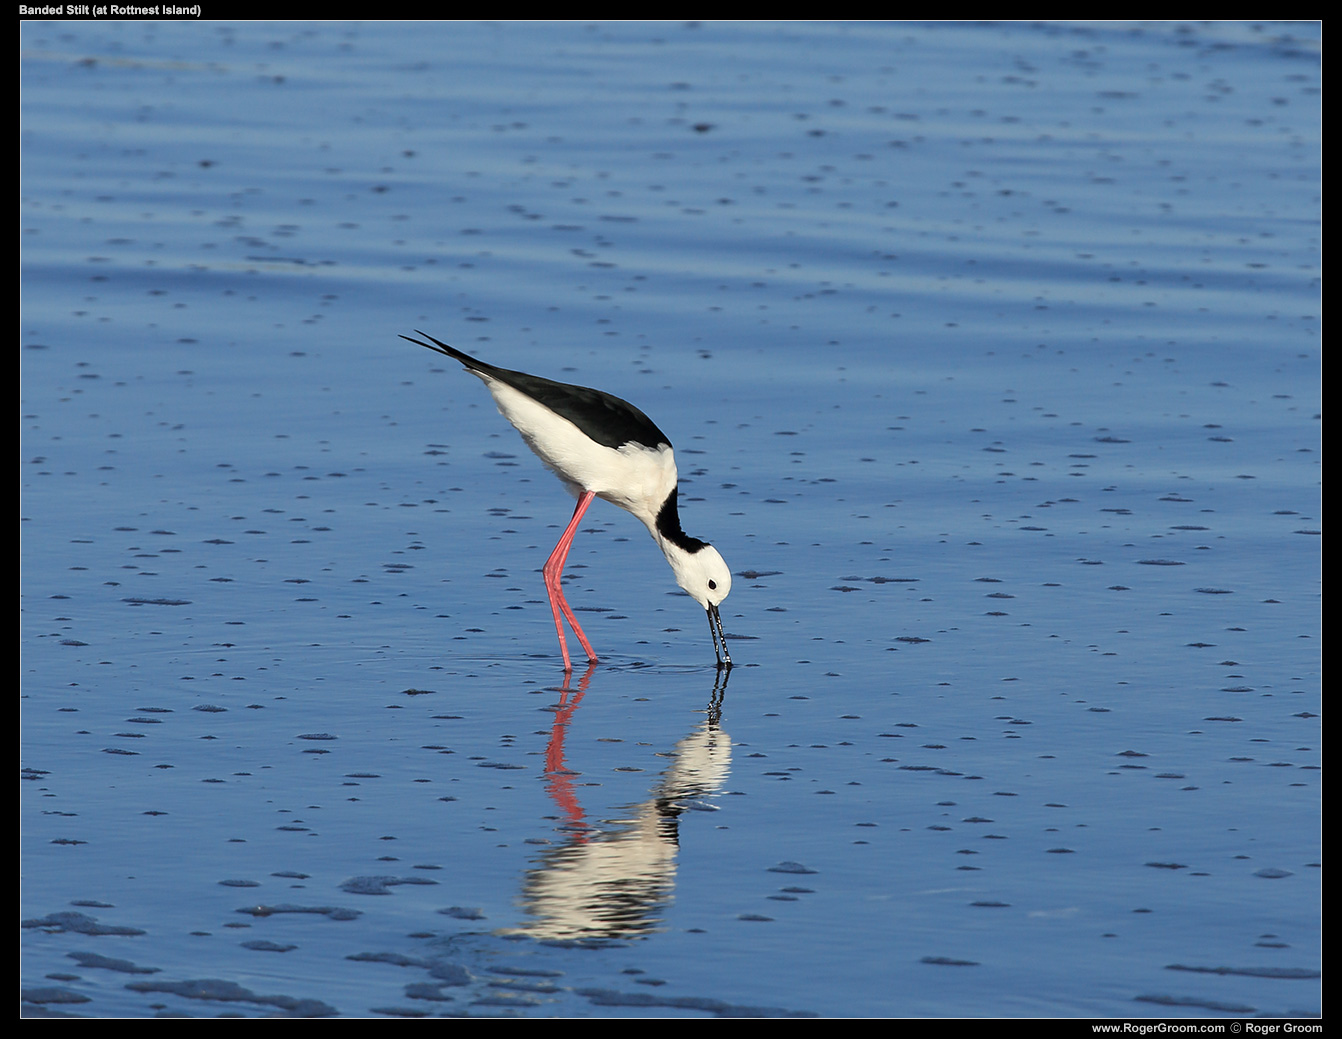 A Banded Stilt on Rottnest Island (here foraging in an inland salt lake).